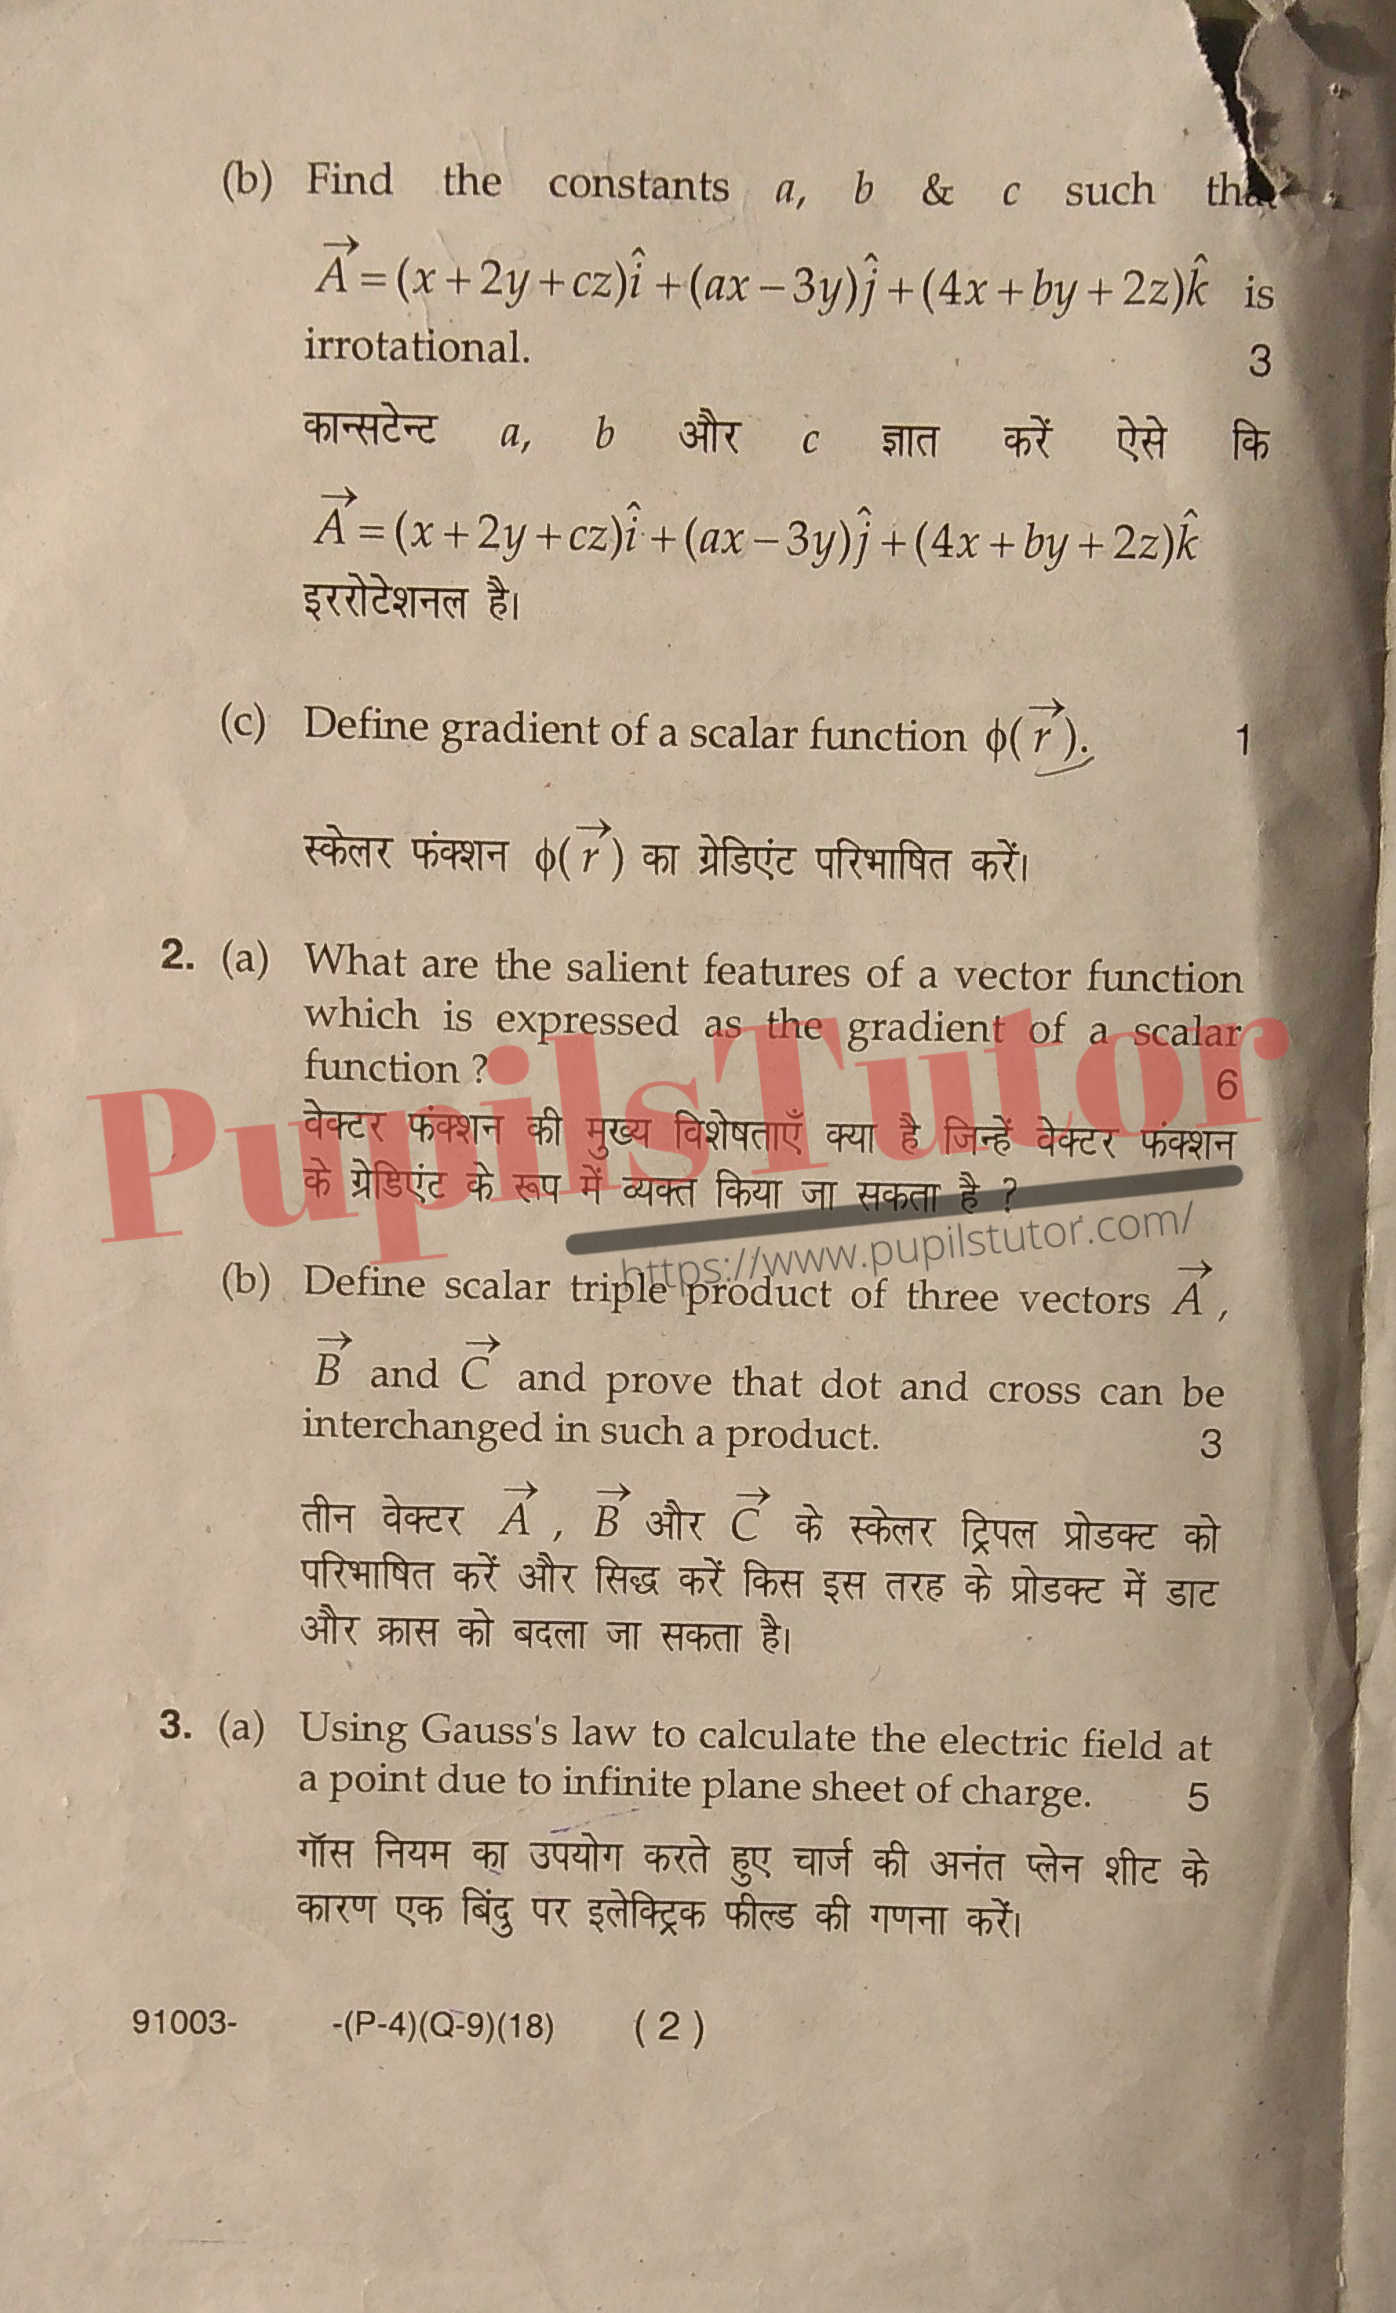 M.D. University B.Sc. [Physics] Electricity And Magnetism First Semester Important Question Answer And Solution - www.pupilstutor.com (Paper Page Number 2)